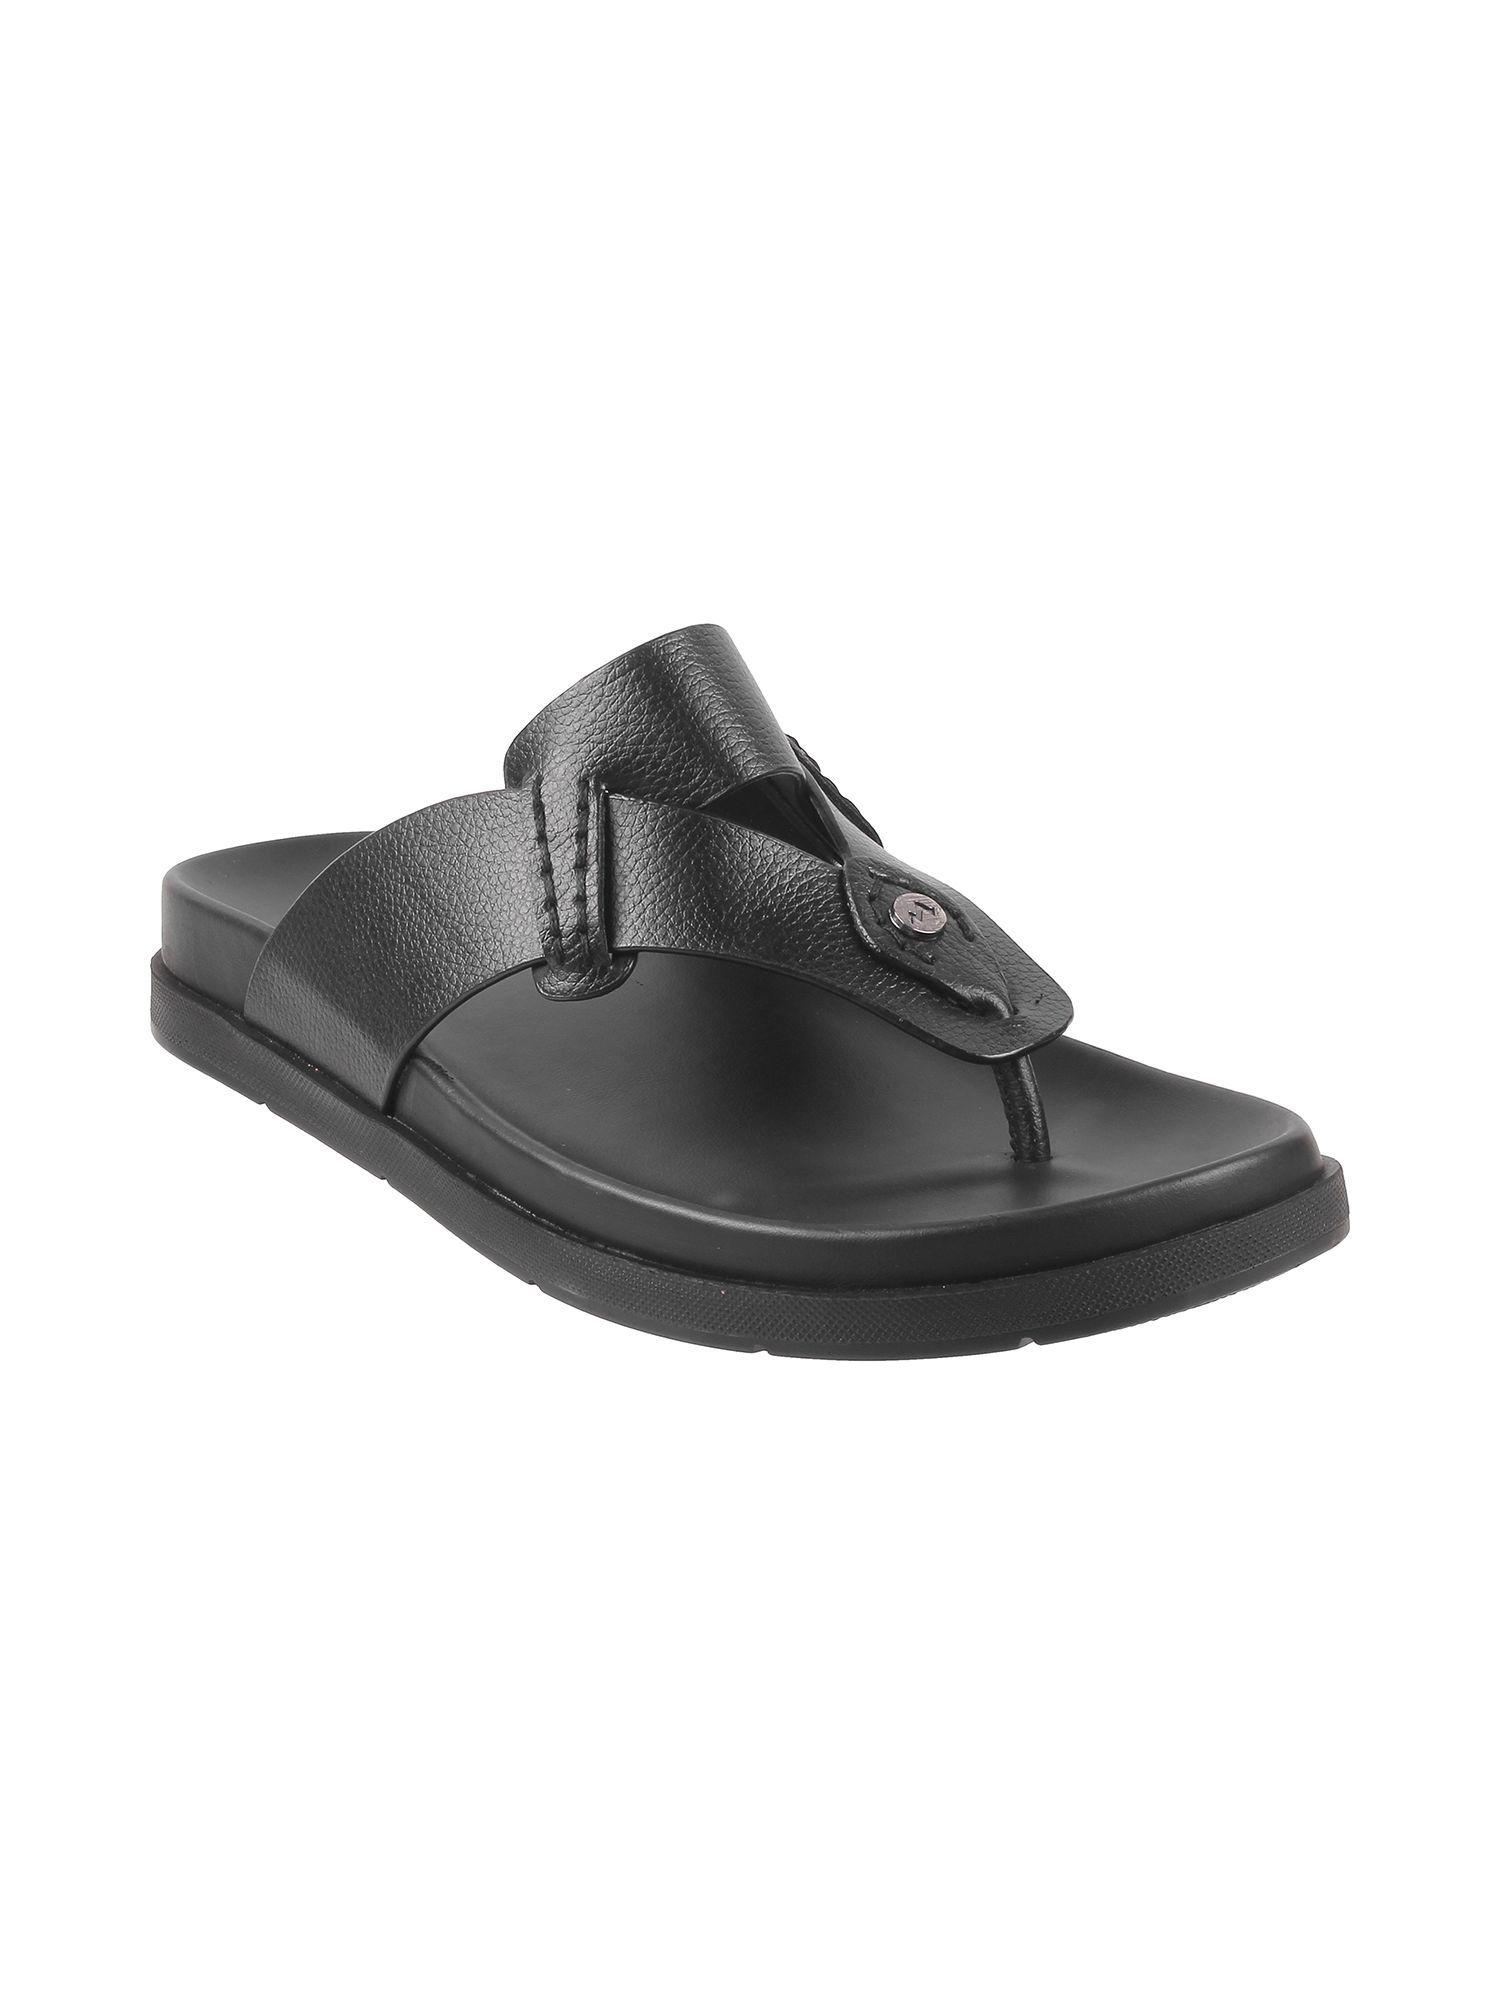 men-casual-synthetic-black-sandals